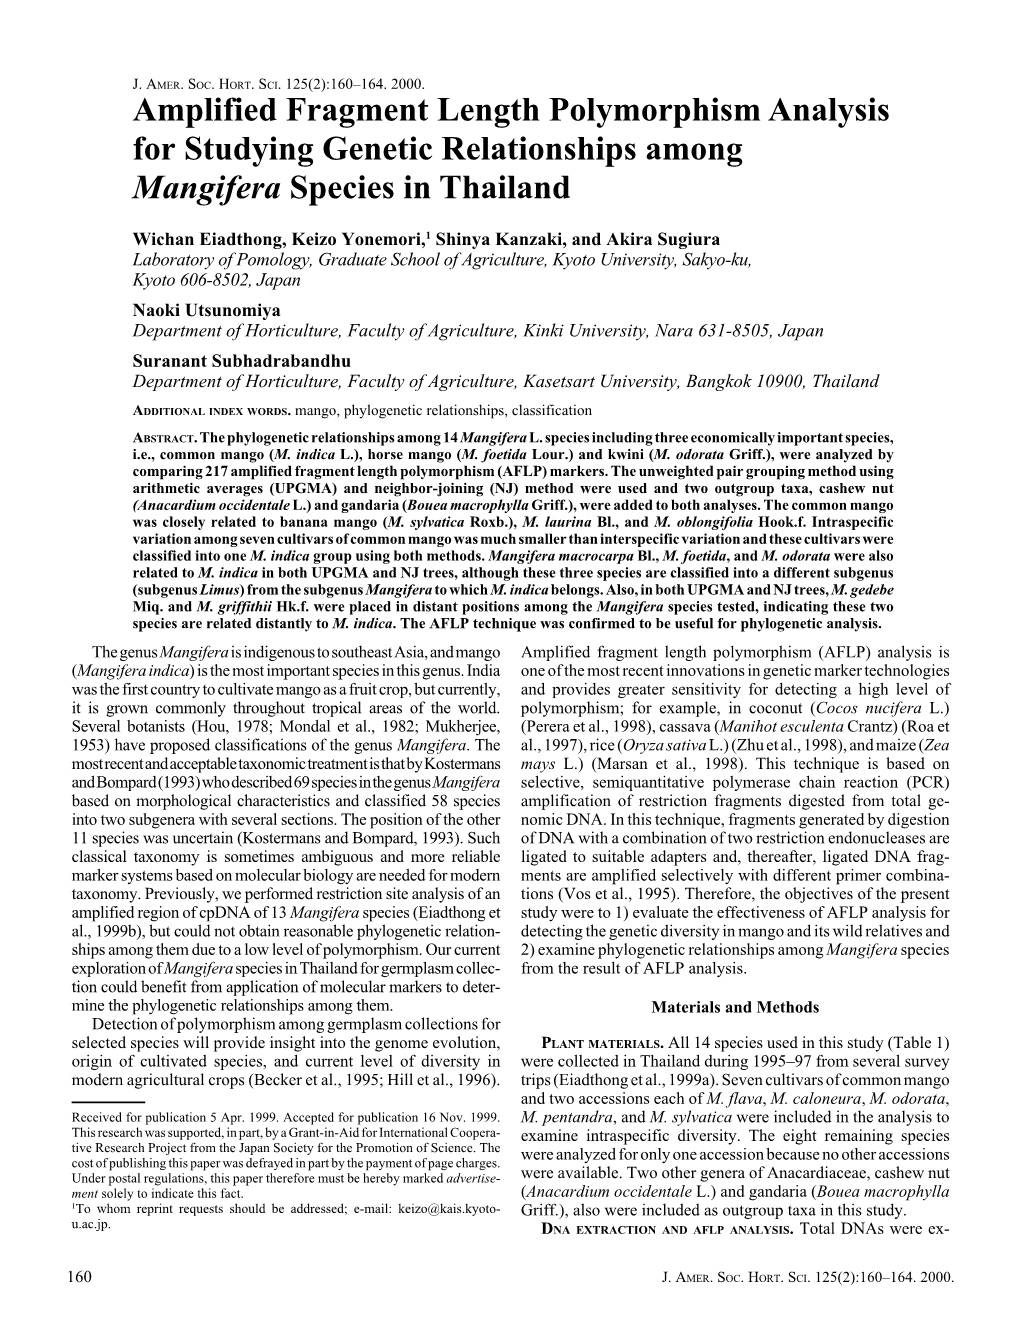 Amplified Fragment Length Polymorphism Analysis for Studying Genetic Relationships Among Mangifera Species in Thailand